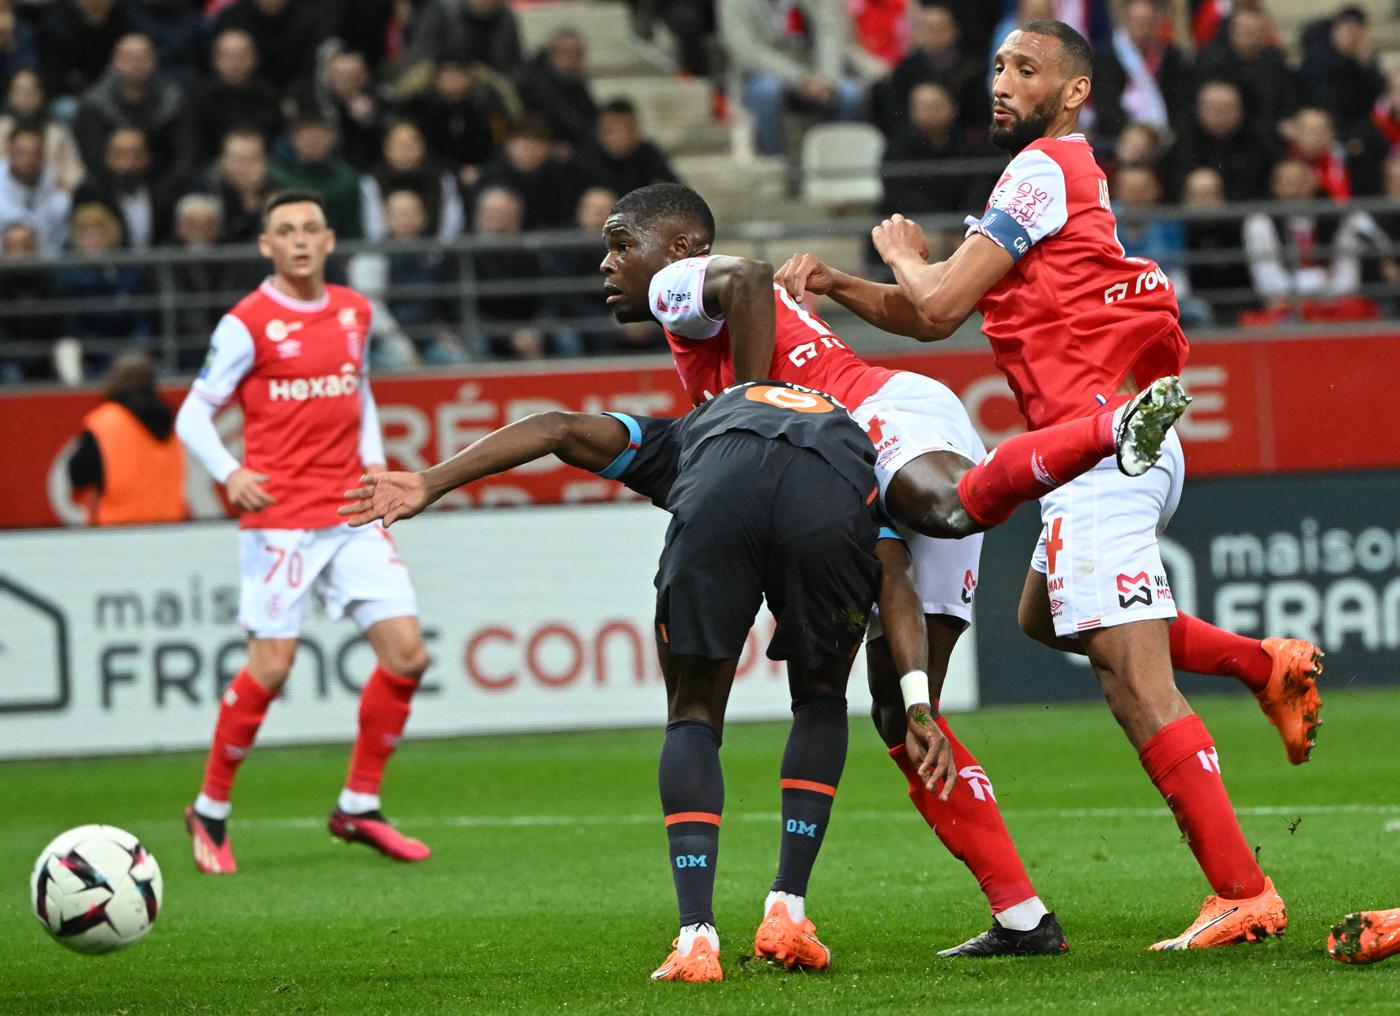 Reims - Marseille - 1:2. French Premier League, round of 28. Match Review, Statistics